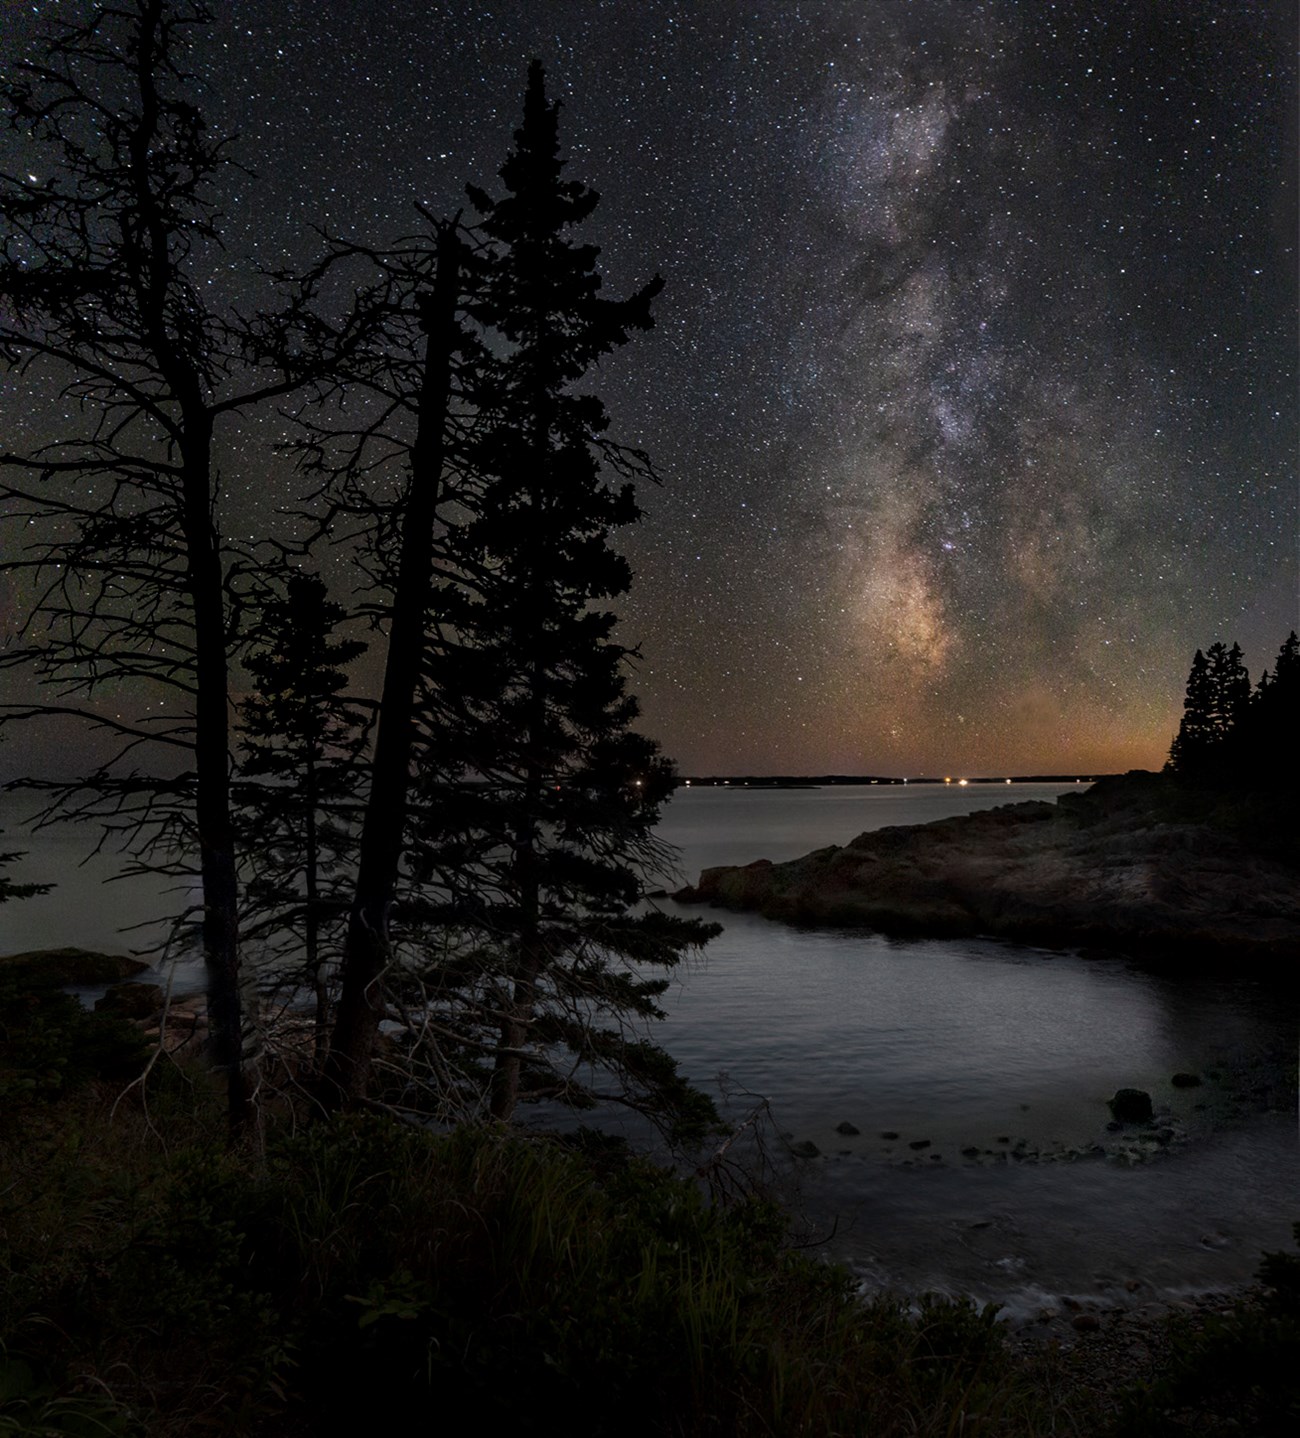 Night sky image with Milky Way bright in upper right, a tree silhouette at left, and water and faint rocky shoreline in foreground